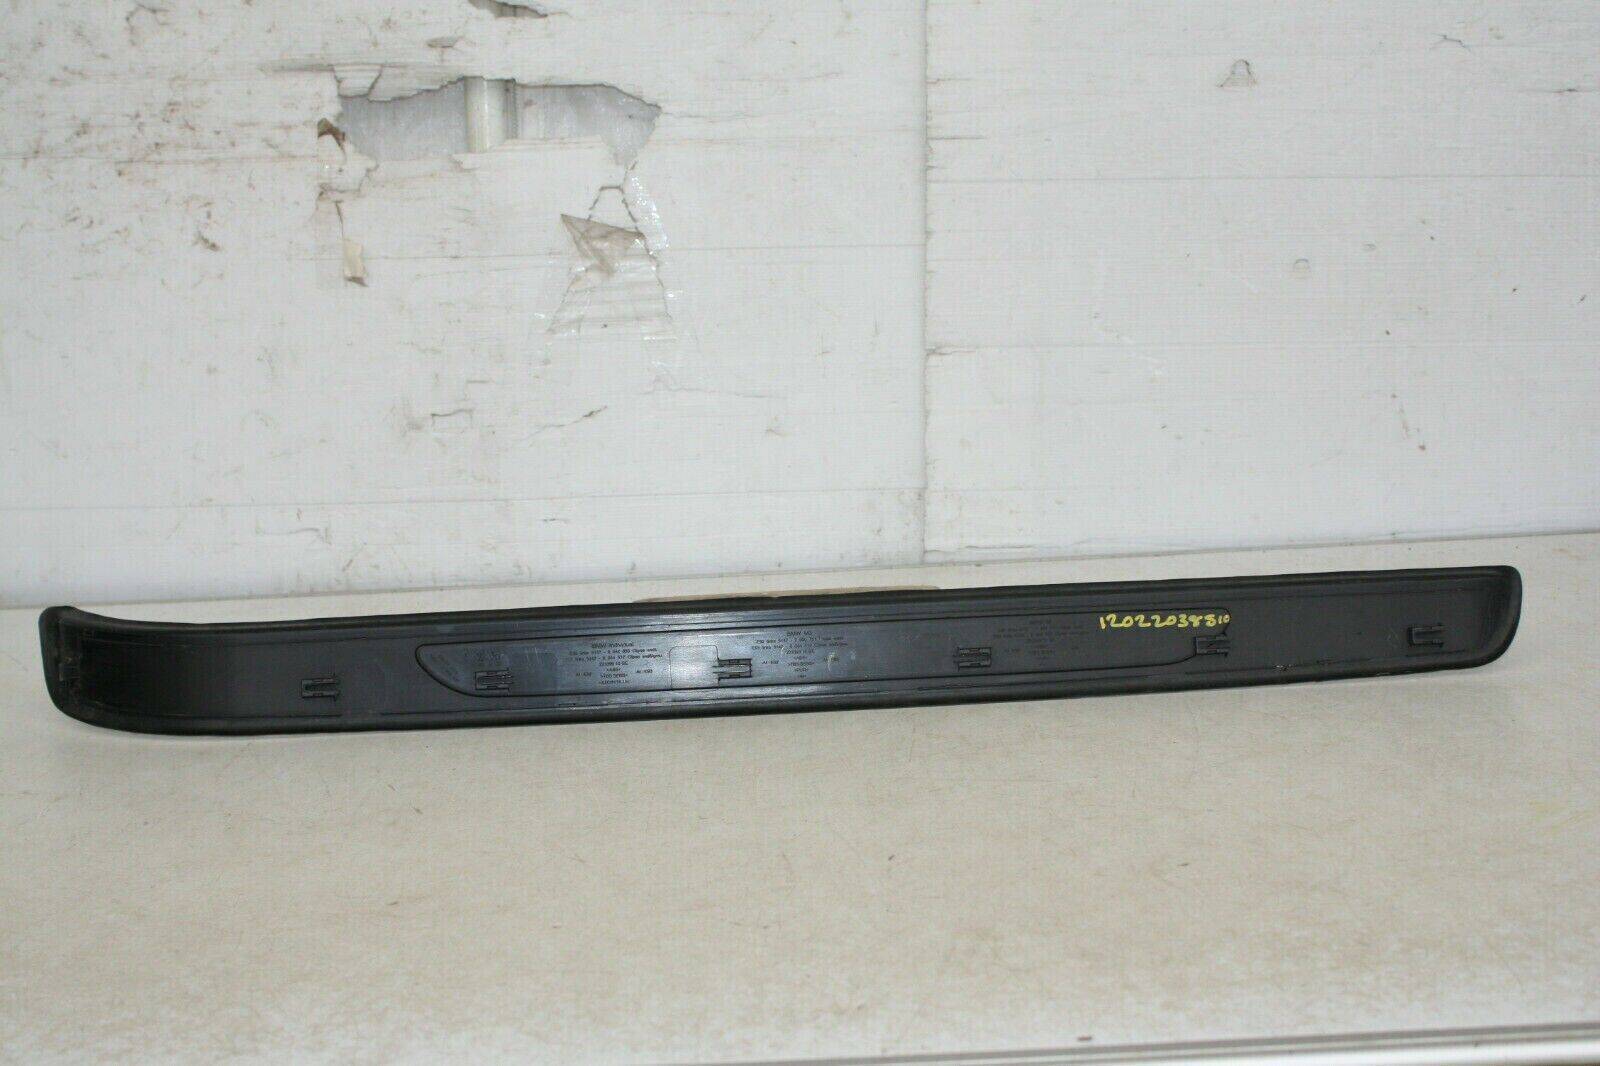 BMW-3-SERIES-FRONT-LEFT-DOOR-ENTRANCE-SILL-STRIP-2006-TO-2010-175431720438-5